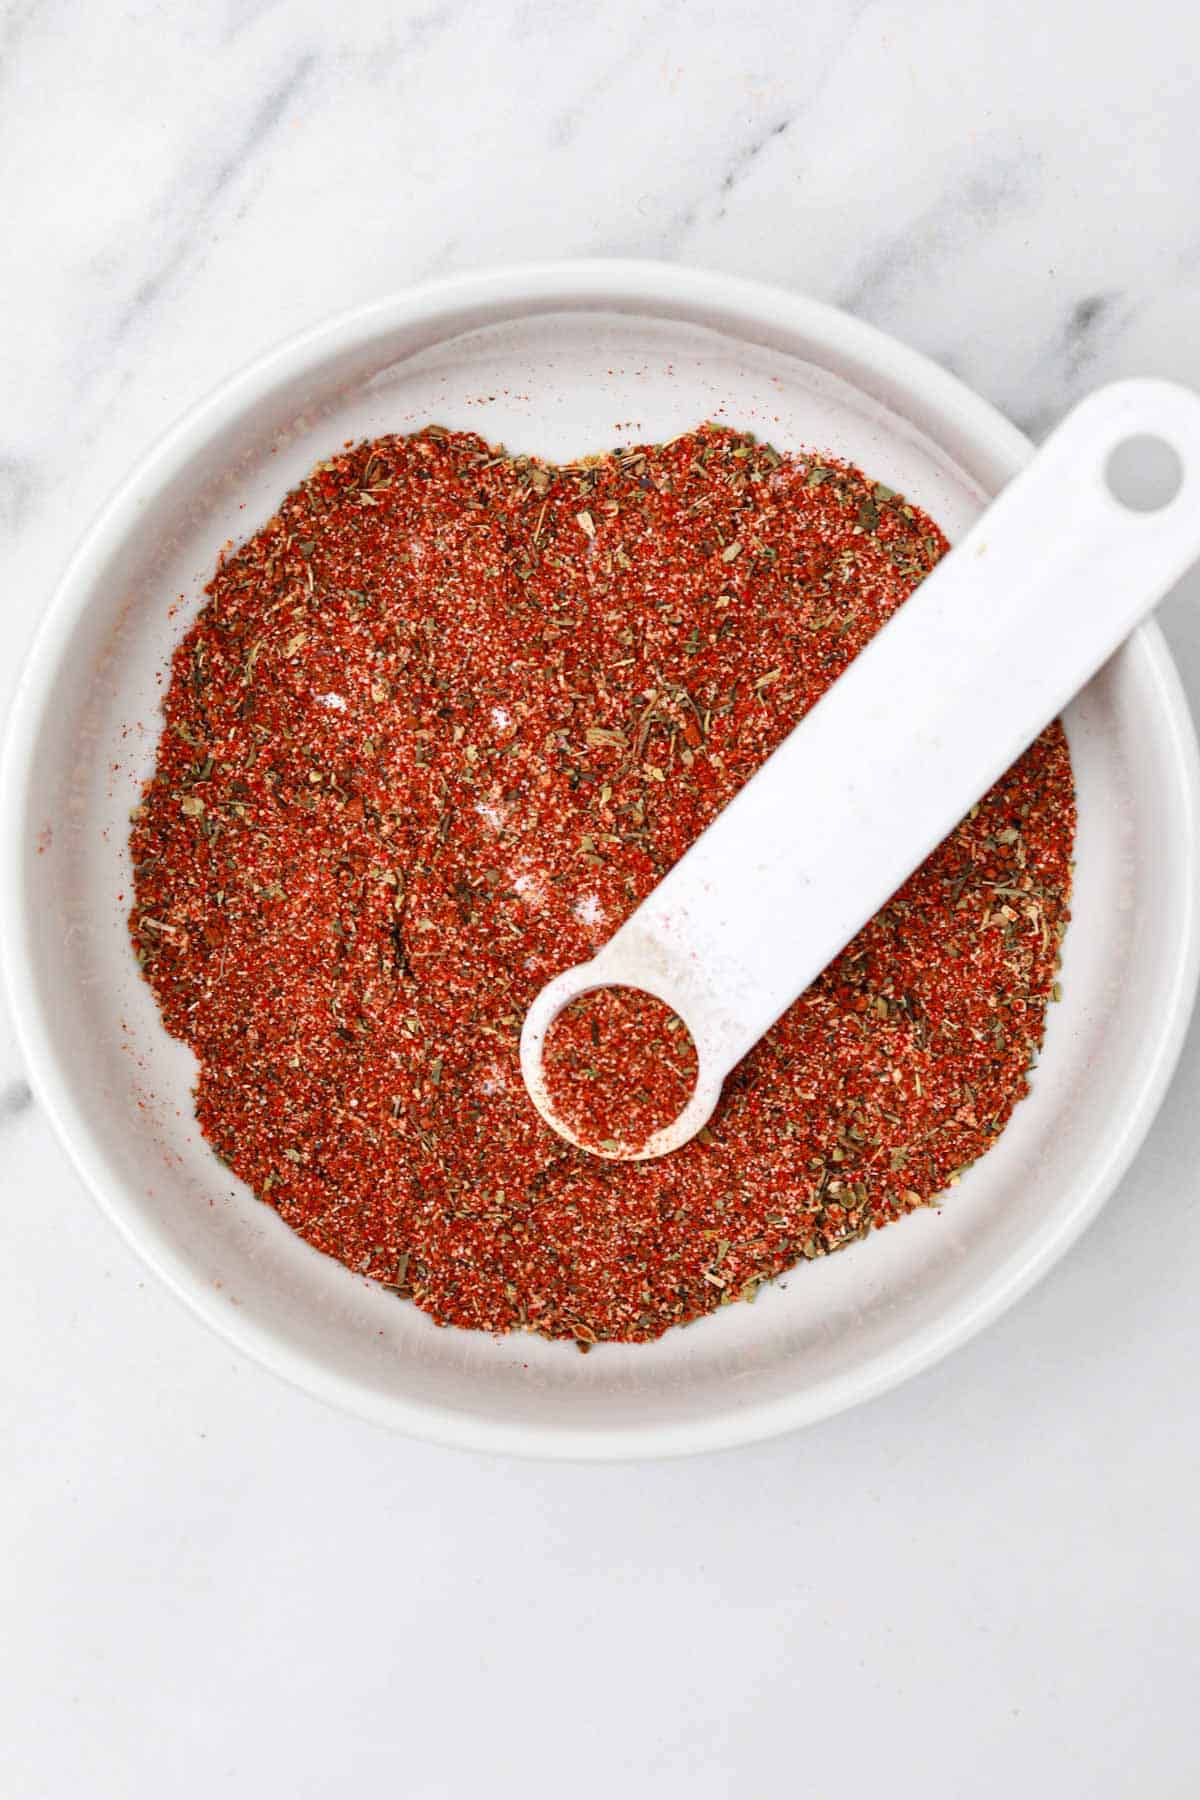 the seasoning in the mixing bowl.